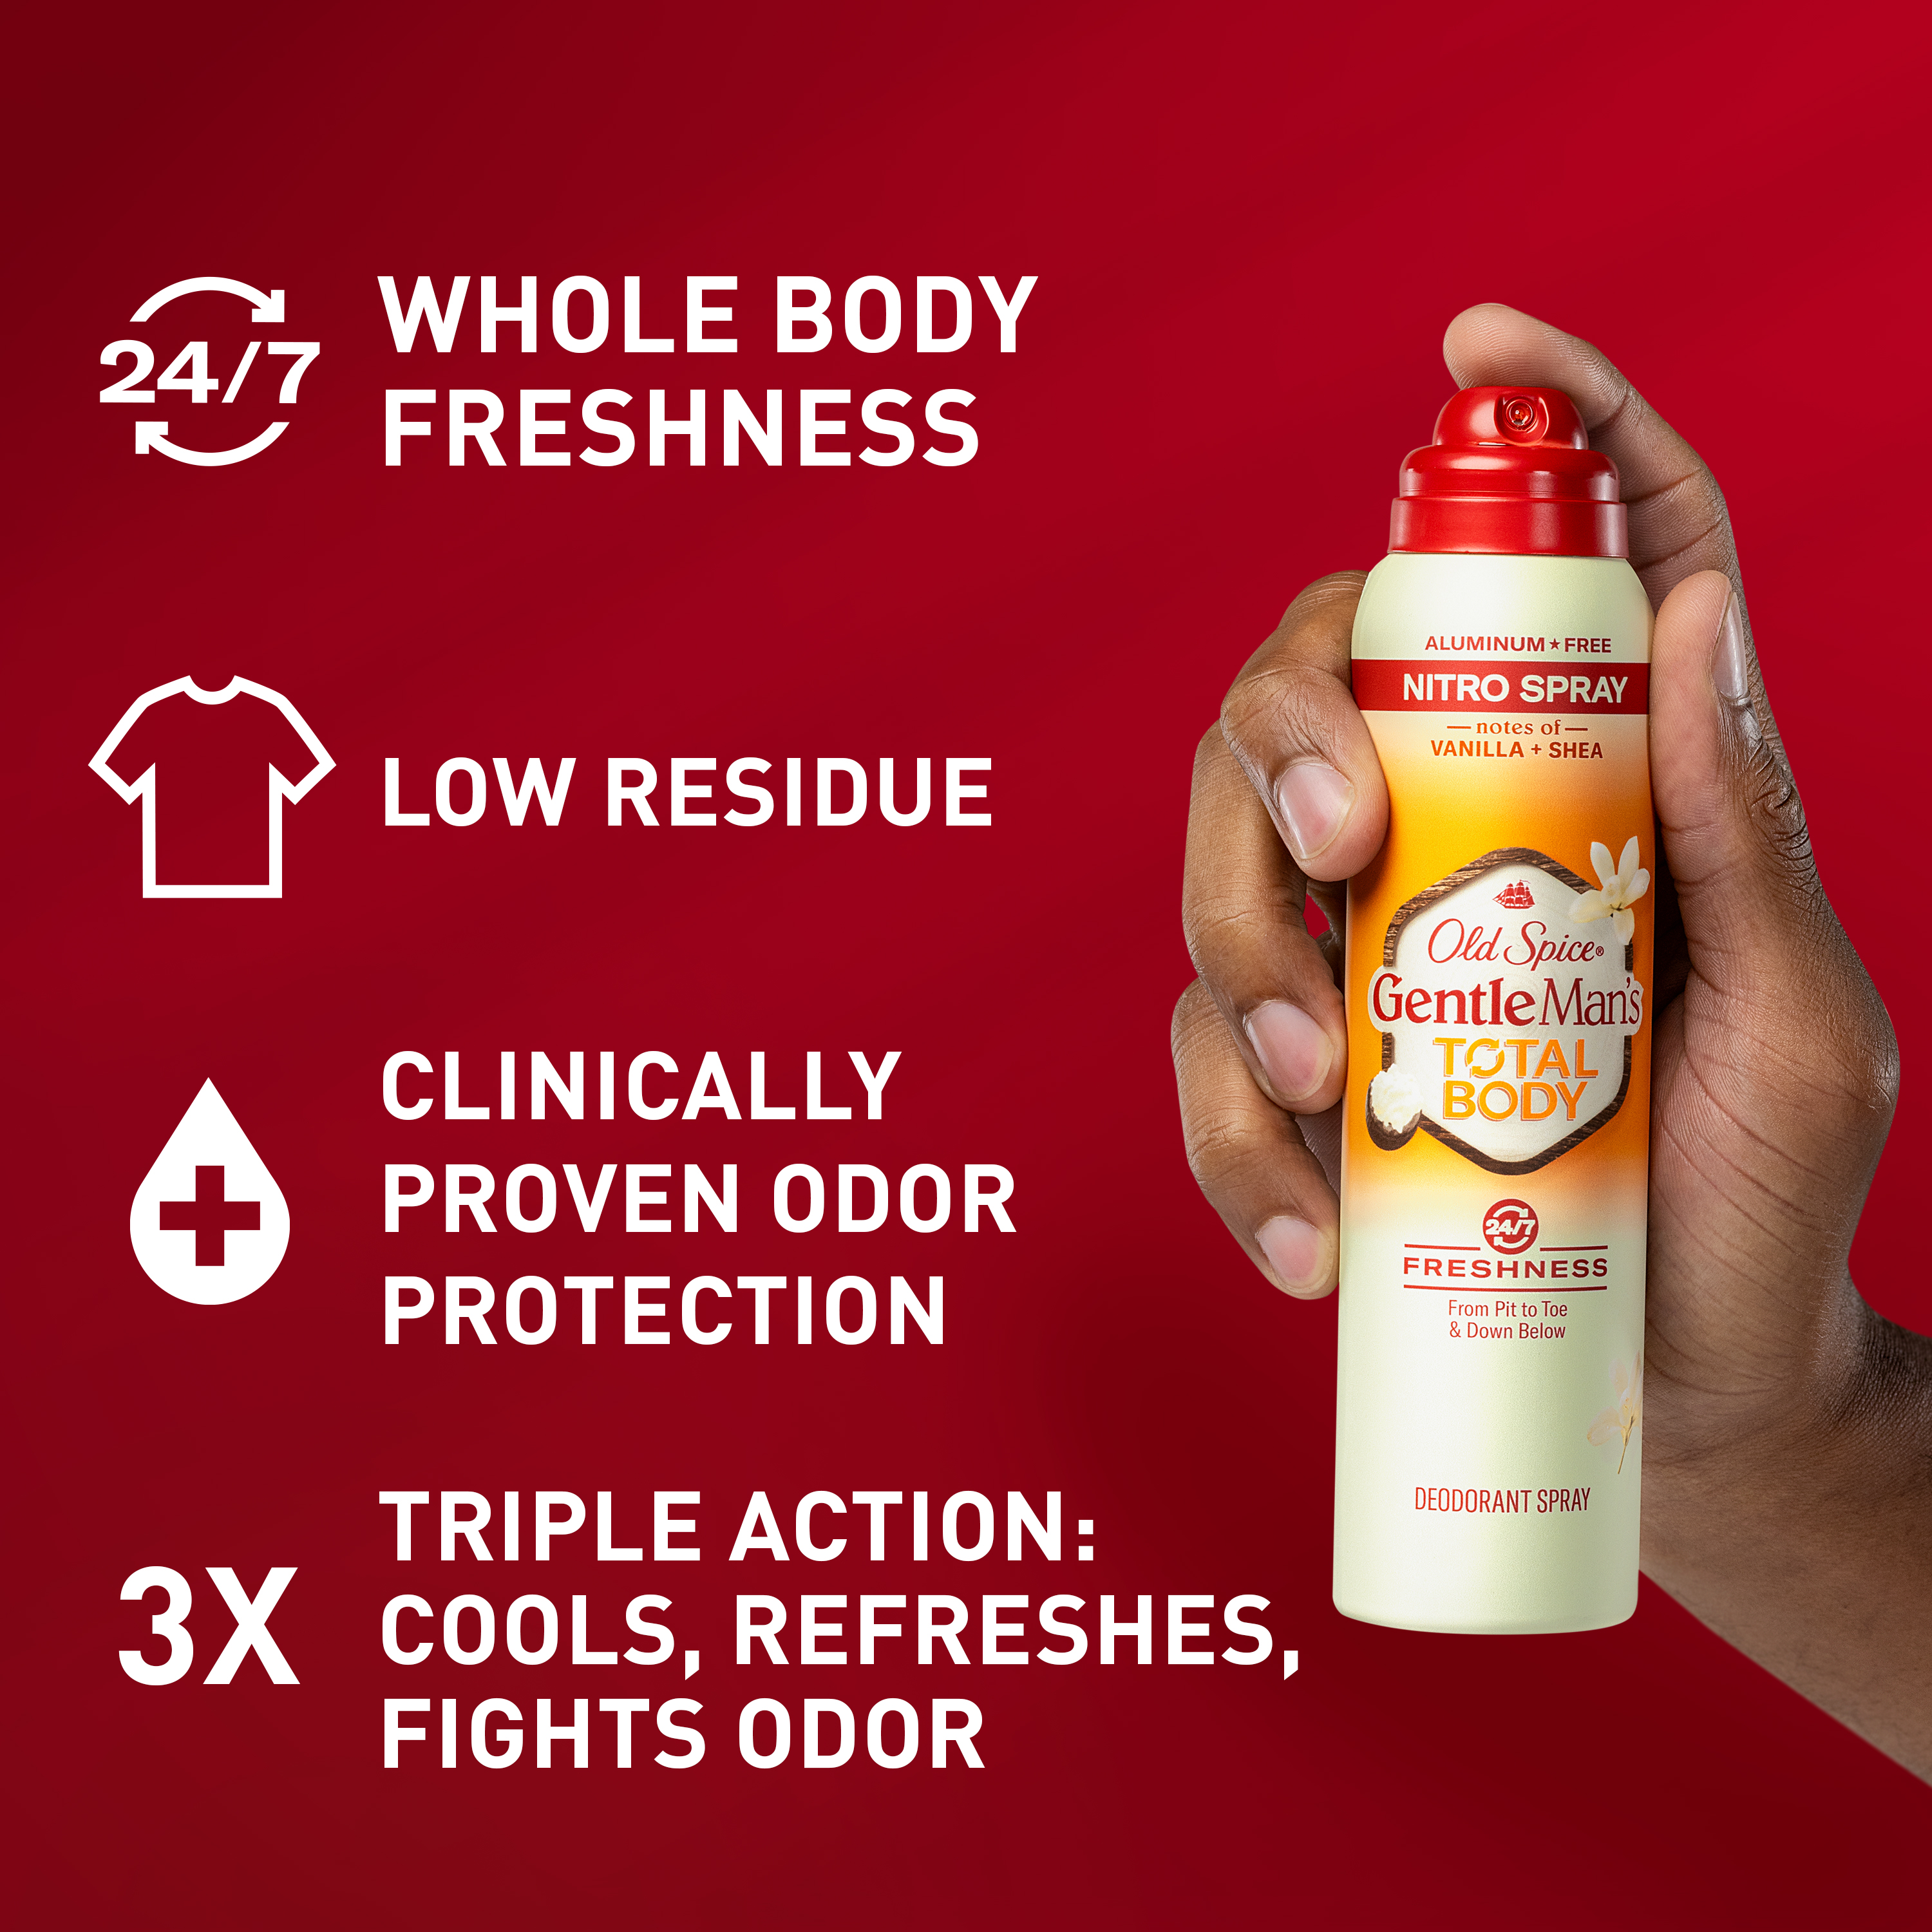 Old Spice GentleMan’s Blend Total Body Deodorant Men, Vanilla + Shea, Aluminum Free Spray for 24/7 Freshness From Pits to Toes and Down Below // Dermatologist Tested Full Body Deodorant, 3.5 oz
